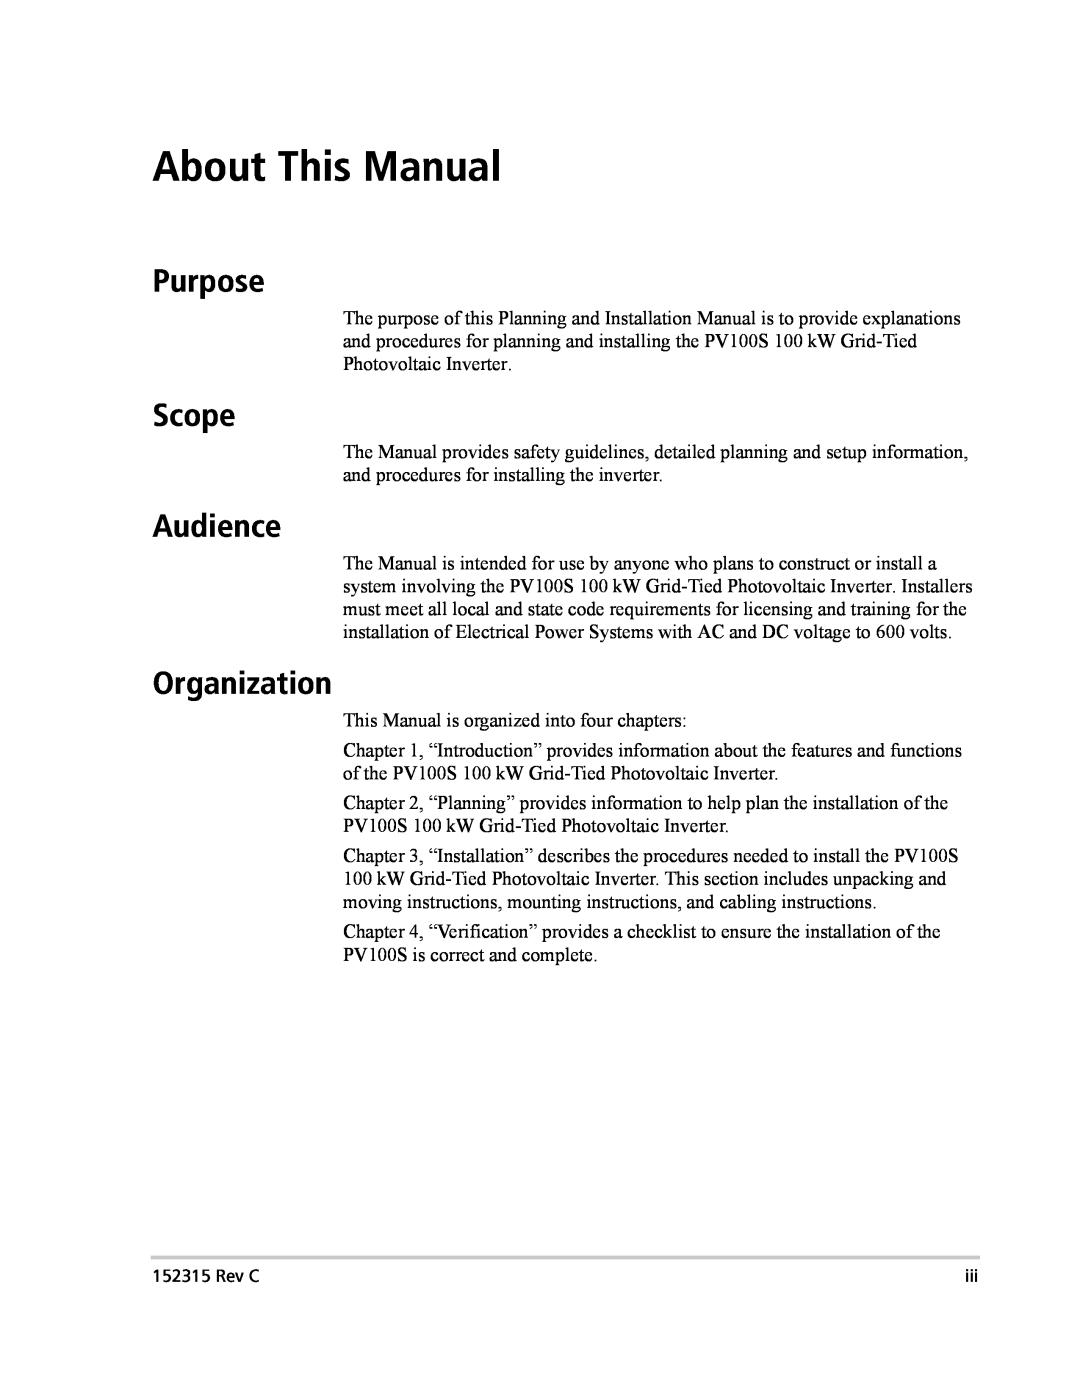 Xantrex Technology PV100S-480 installation manual About This Manual, Purpose, Scope, Audience, Organization 